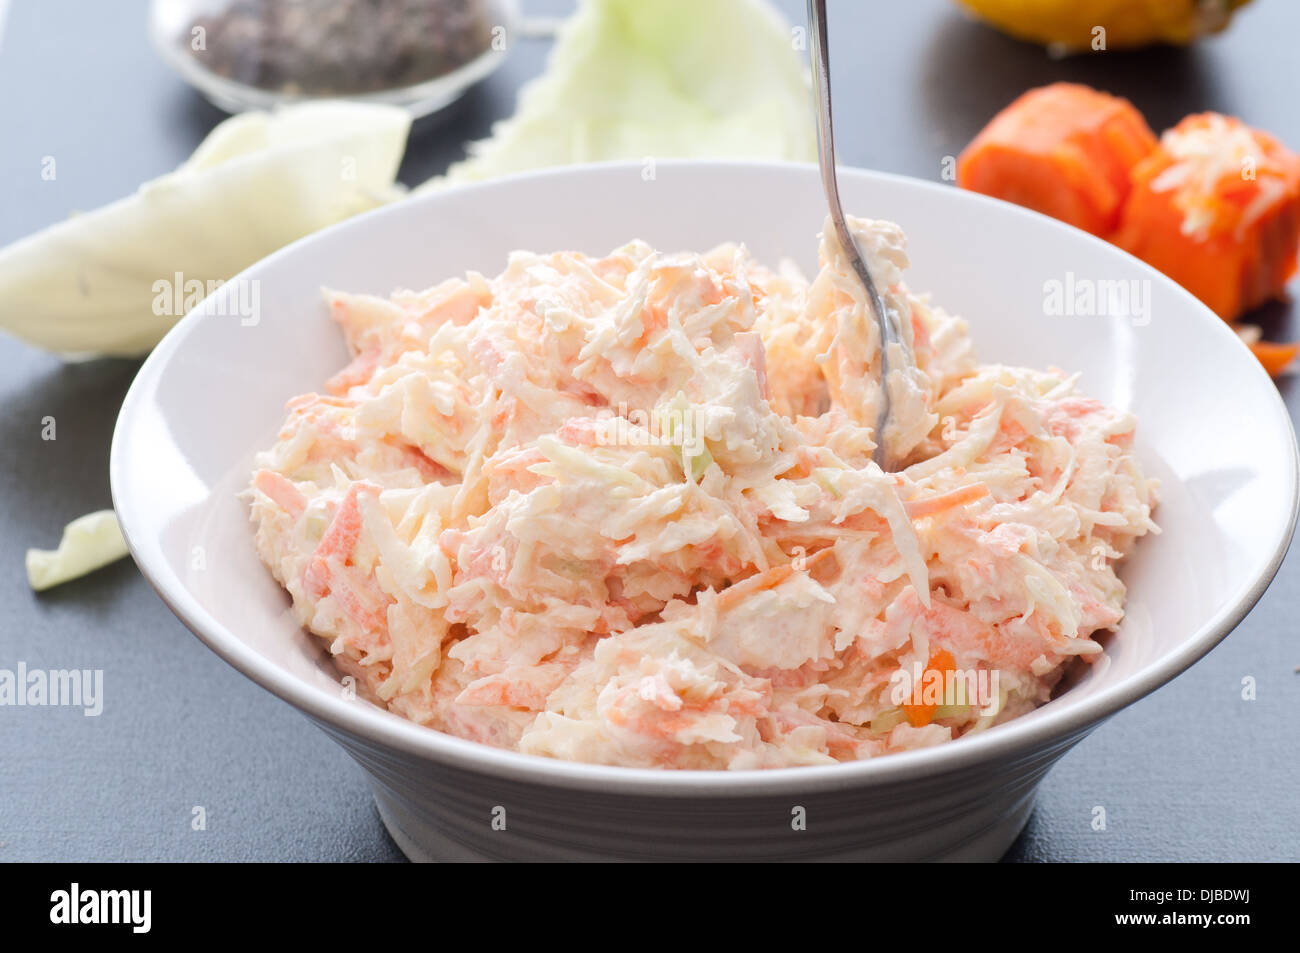 Homemade creamy carrot and cabbage coleslaw. Stock Photo